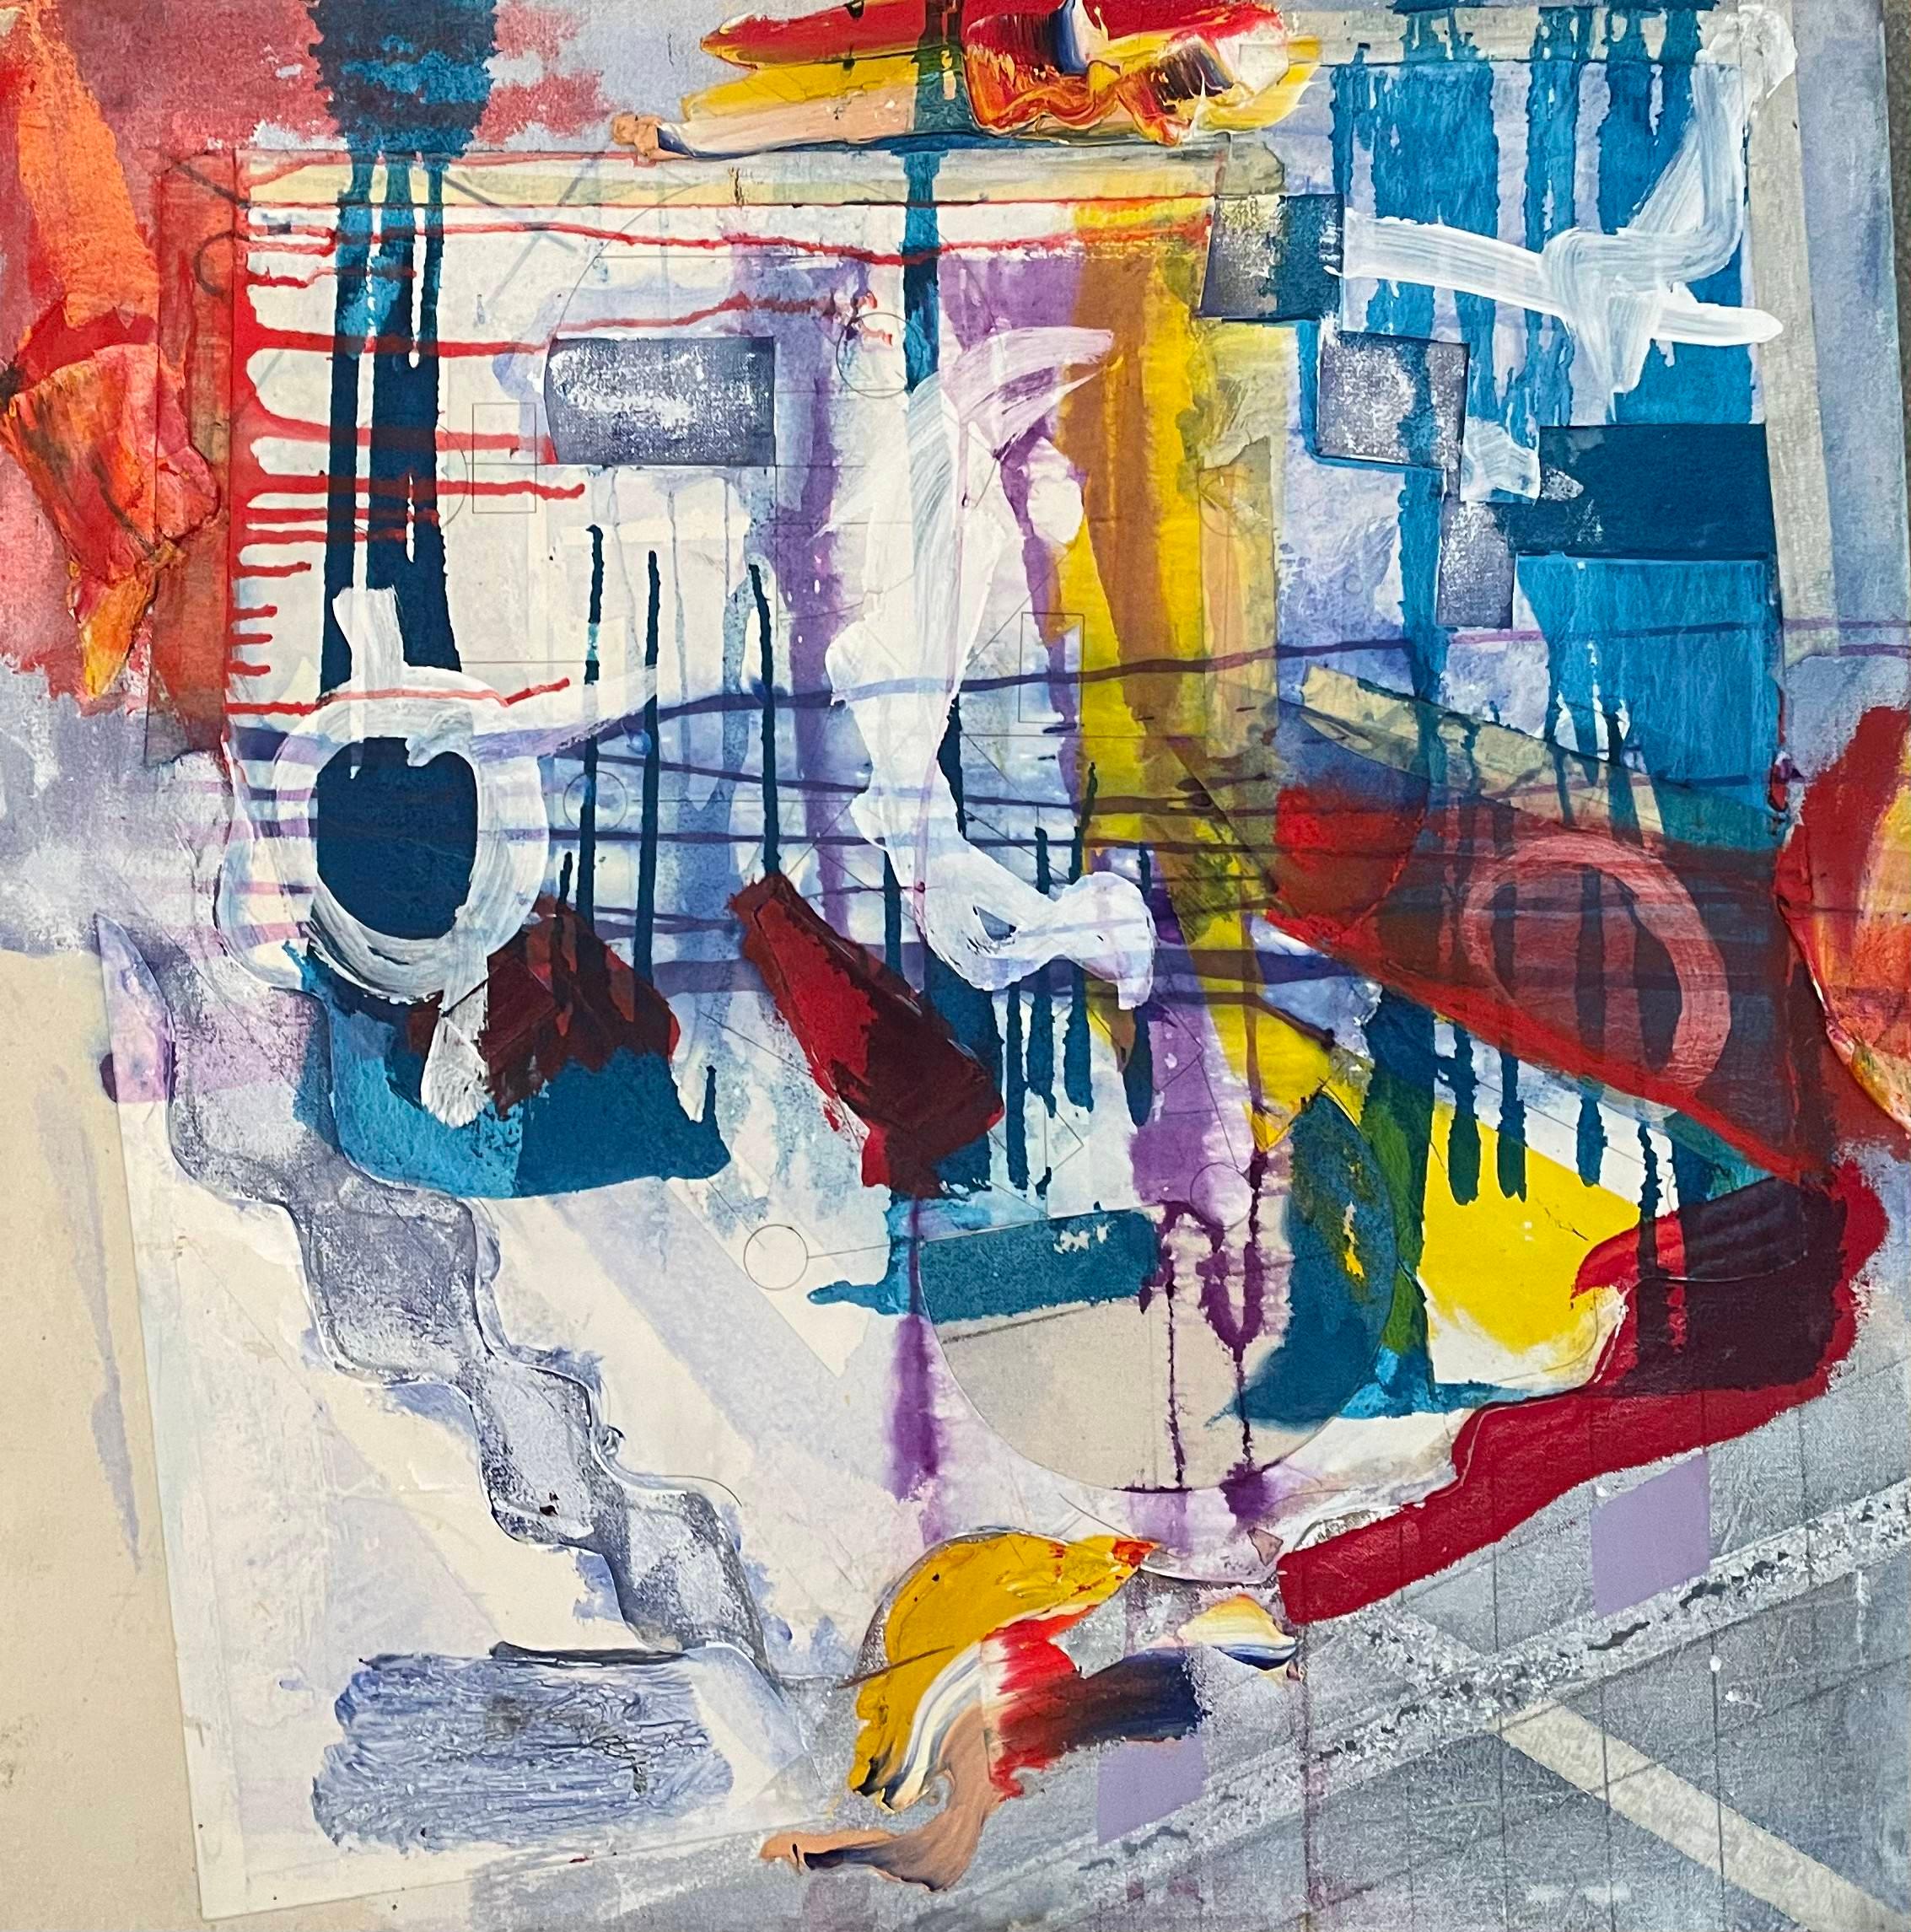 "Interplay" by Steven Rehfeld is a compelling 25" x 25" contemporary abstract mixed media work, embodying the intricate dance between structure and spontaneity. The canvas is a vivid tableau of color and texture, where bold strokes of crimson and